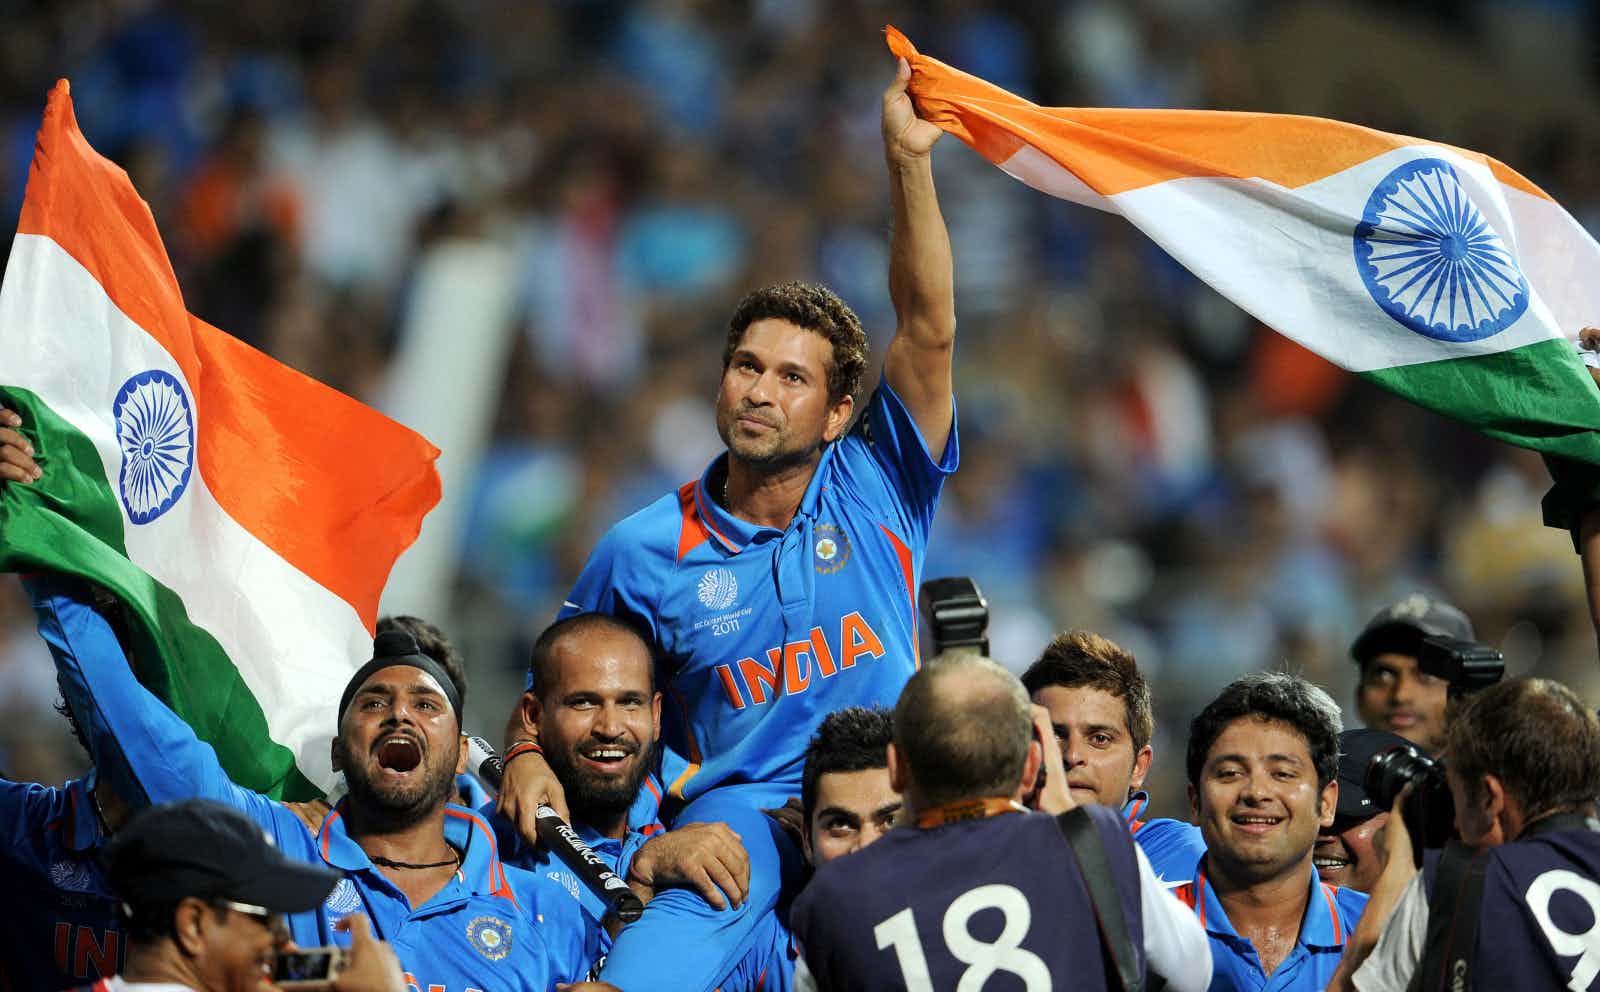 Indian batsman Sachin Tendulkar is carried on his teammates shoulders after India defeated Sri Lanka in the ICC Cricket World Cup 2011 final played at The Wankhede Stadium in Mumbai on April 2, 2011.   (WILLIAM WEST/AFP via Getty Images)